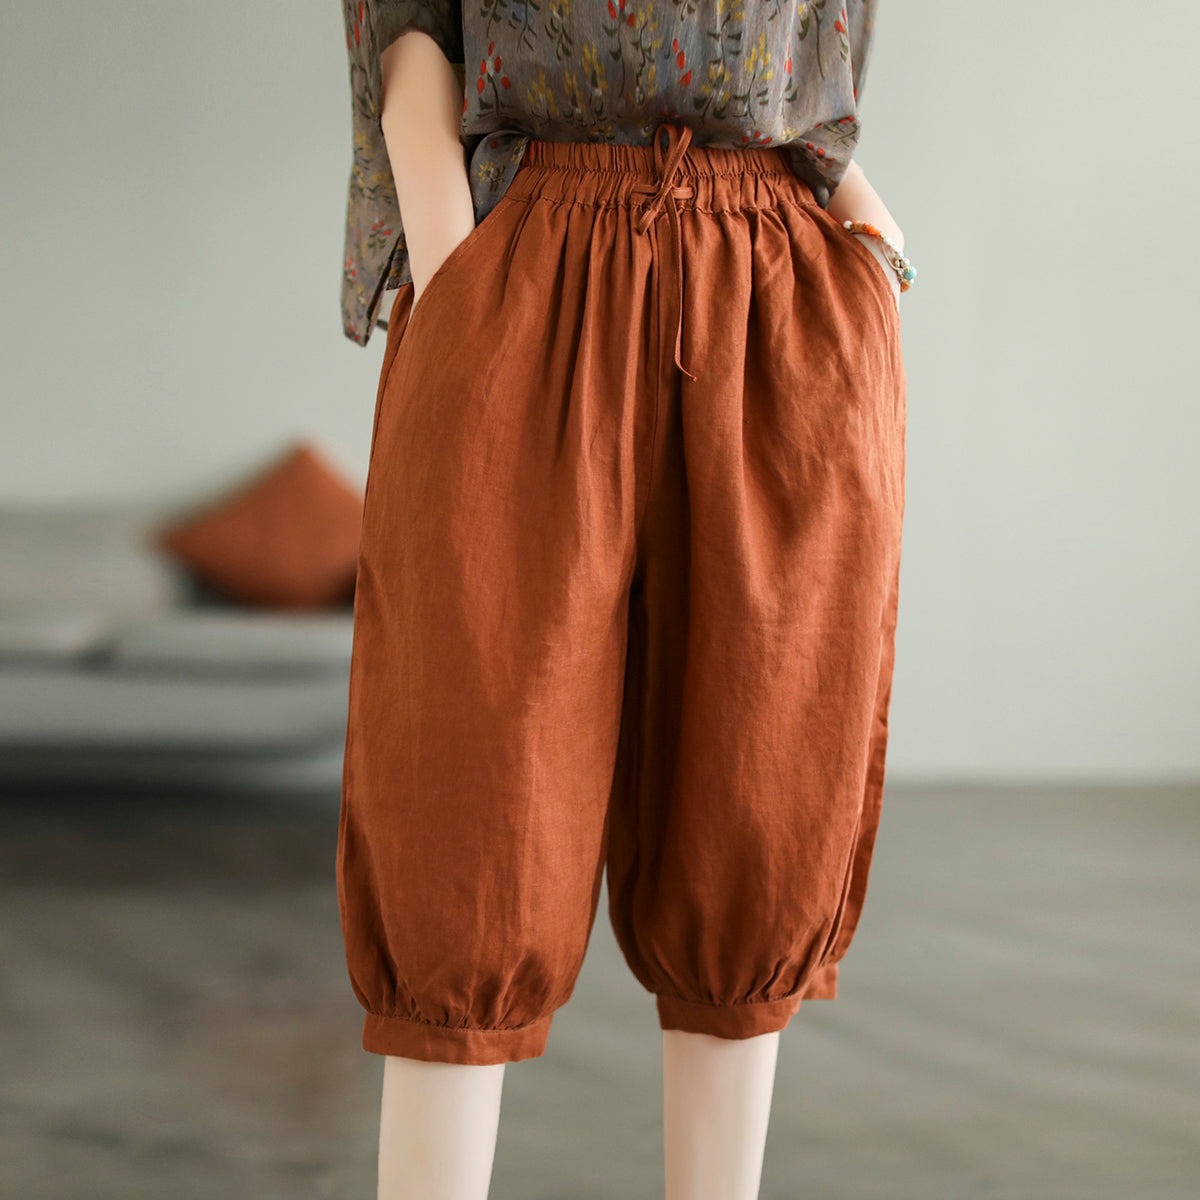 Women Knee Height Summer Solid Linen Casual Shorts Jul 2022 New Arrival One Size Orange 